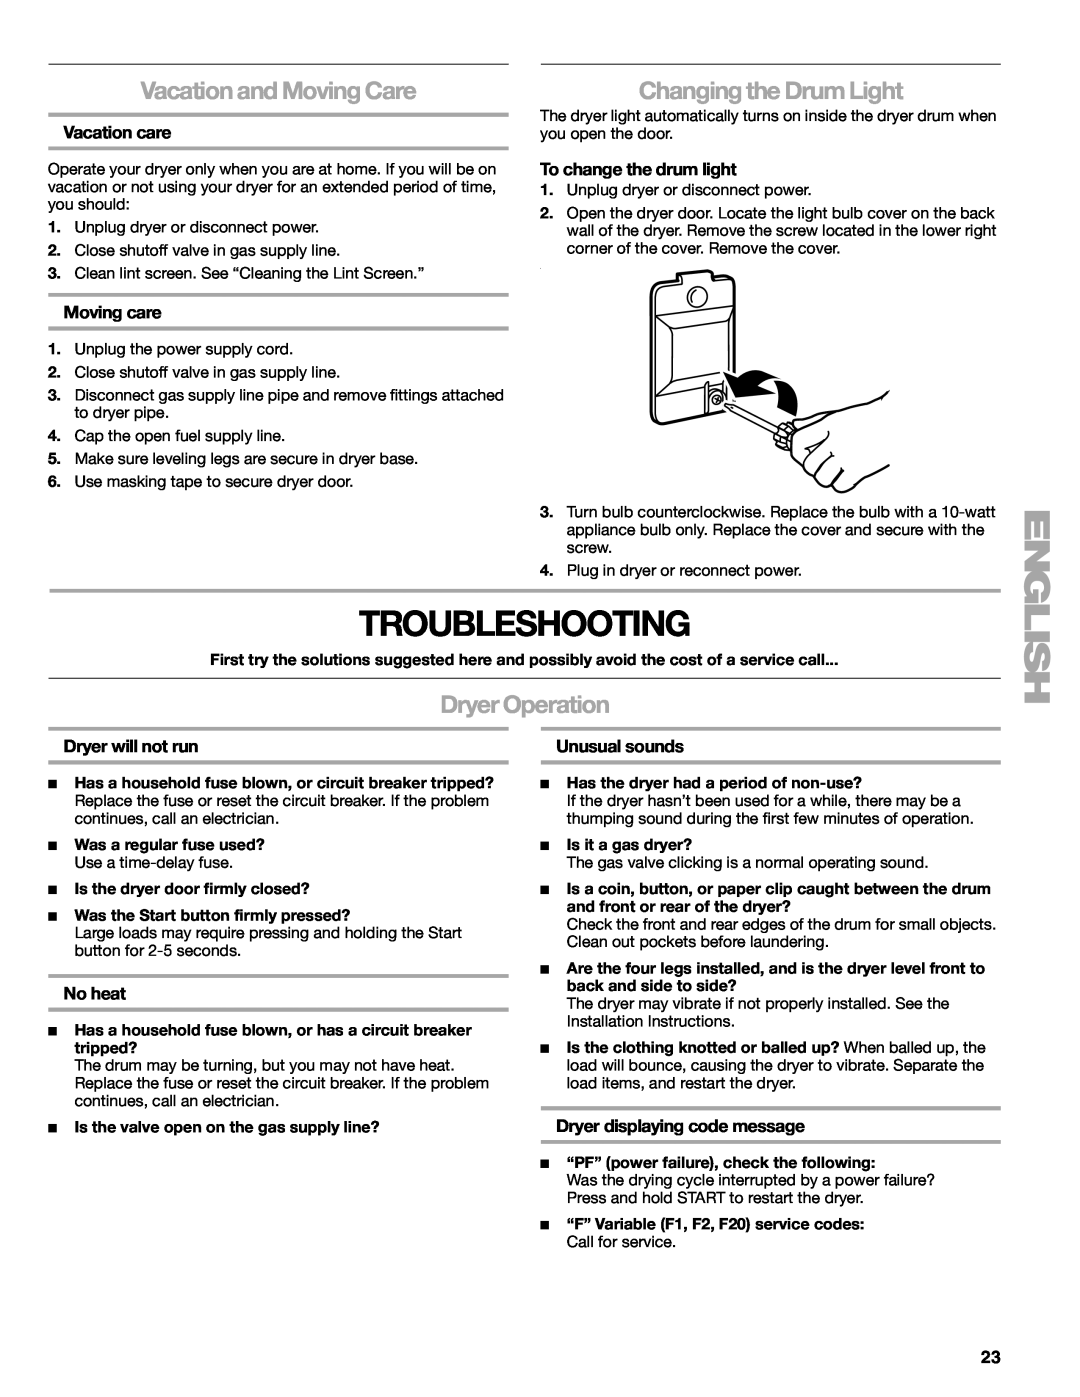 Sears 110.9708 Troubleshooting, Vacation and Moving Care, Changing the Drum Light, Dryer Operation, Vacation care, No heat 